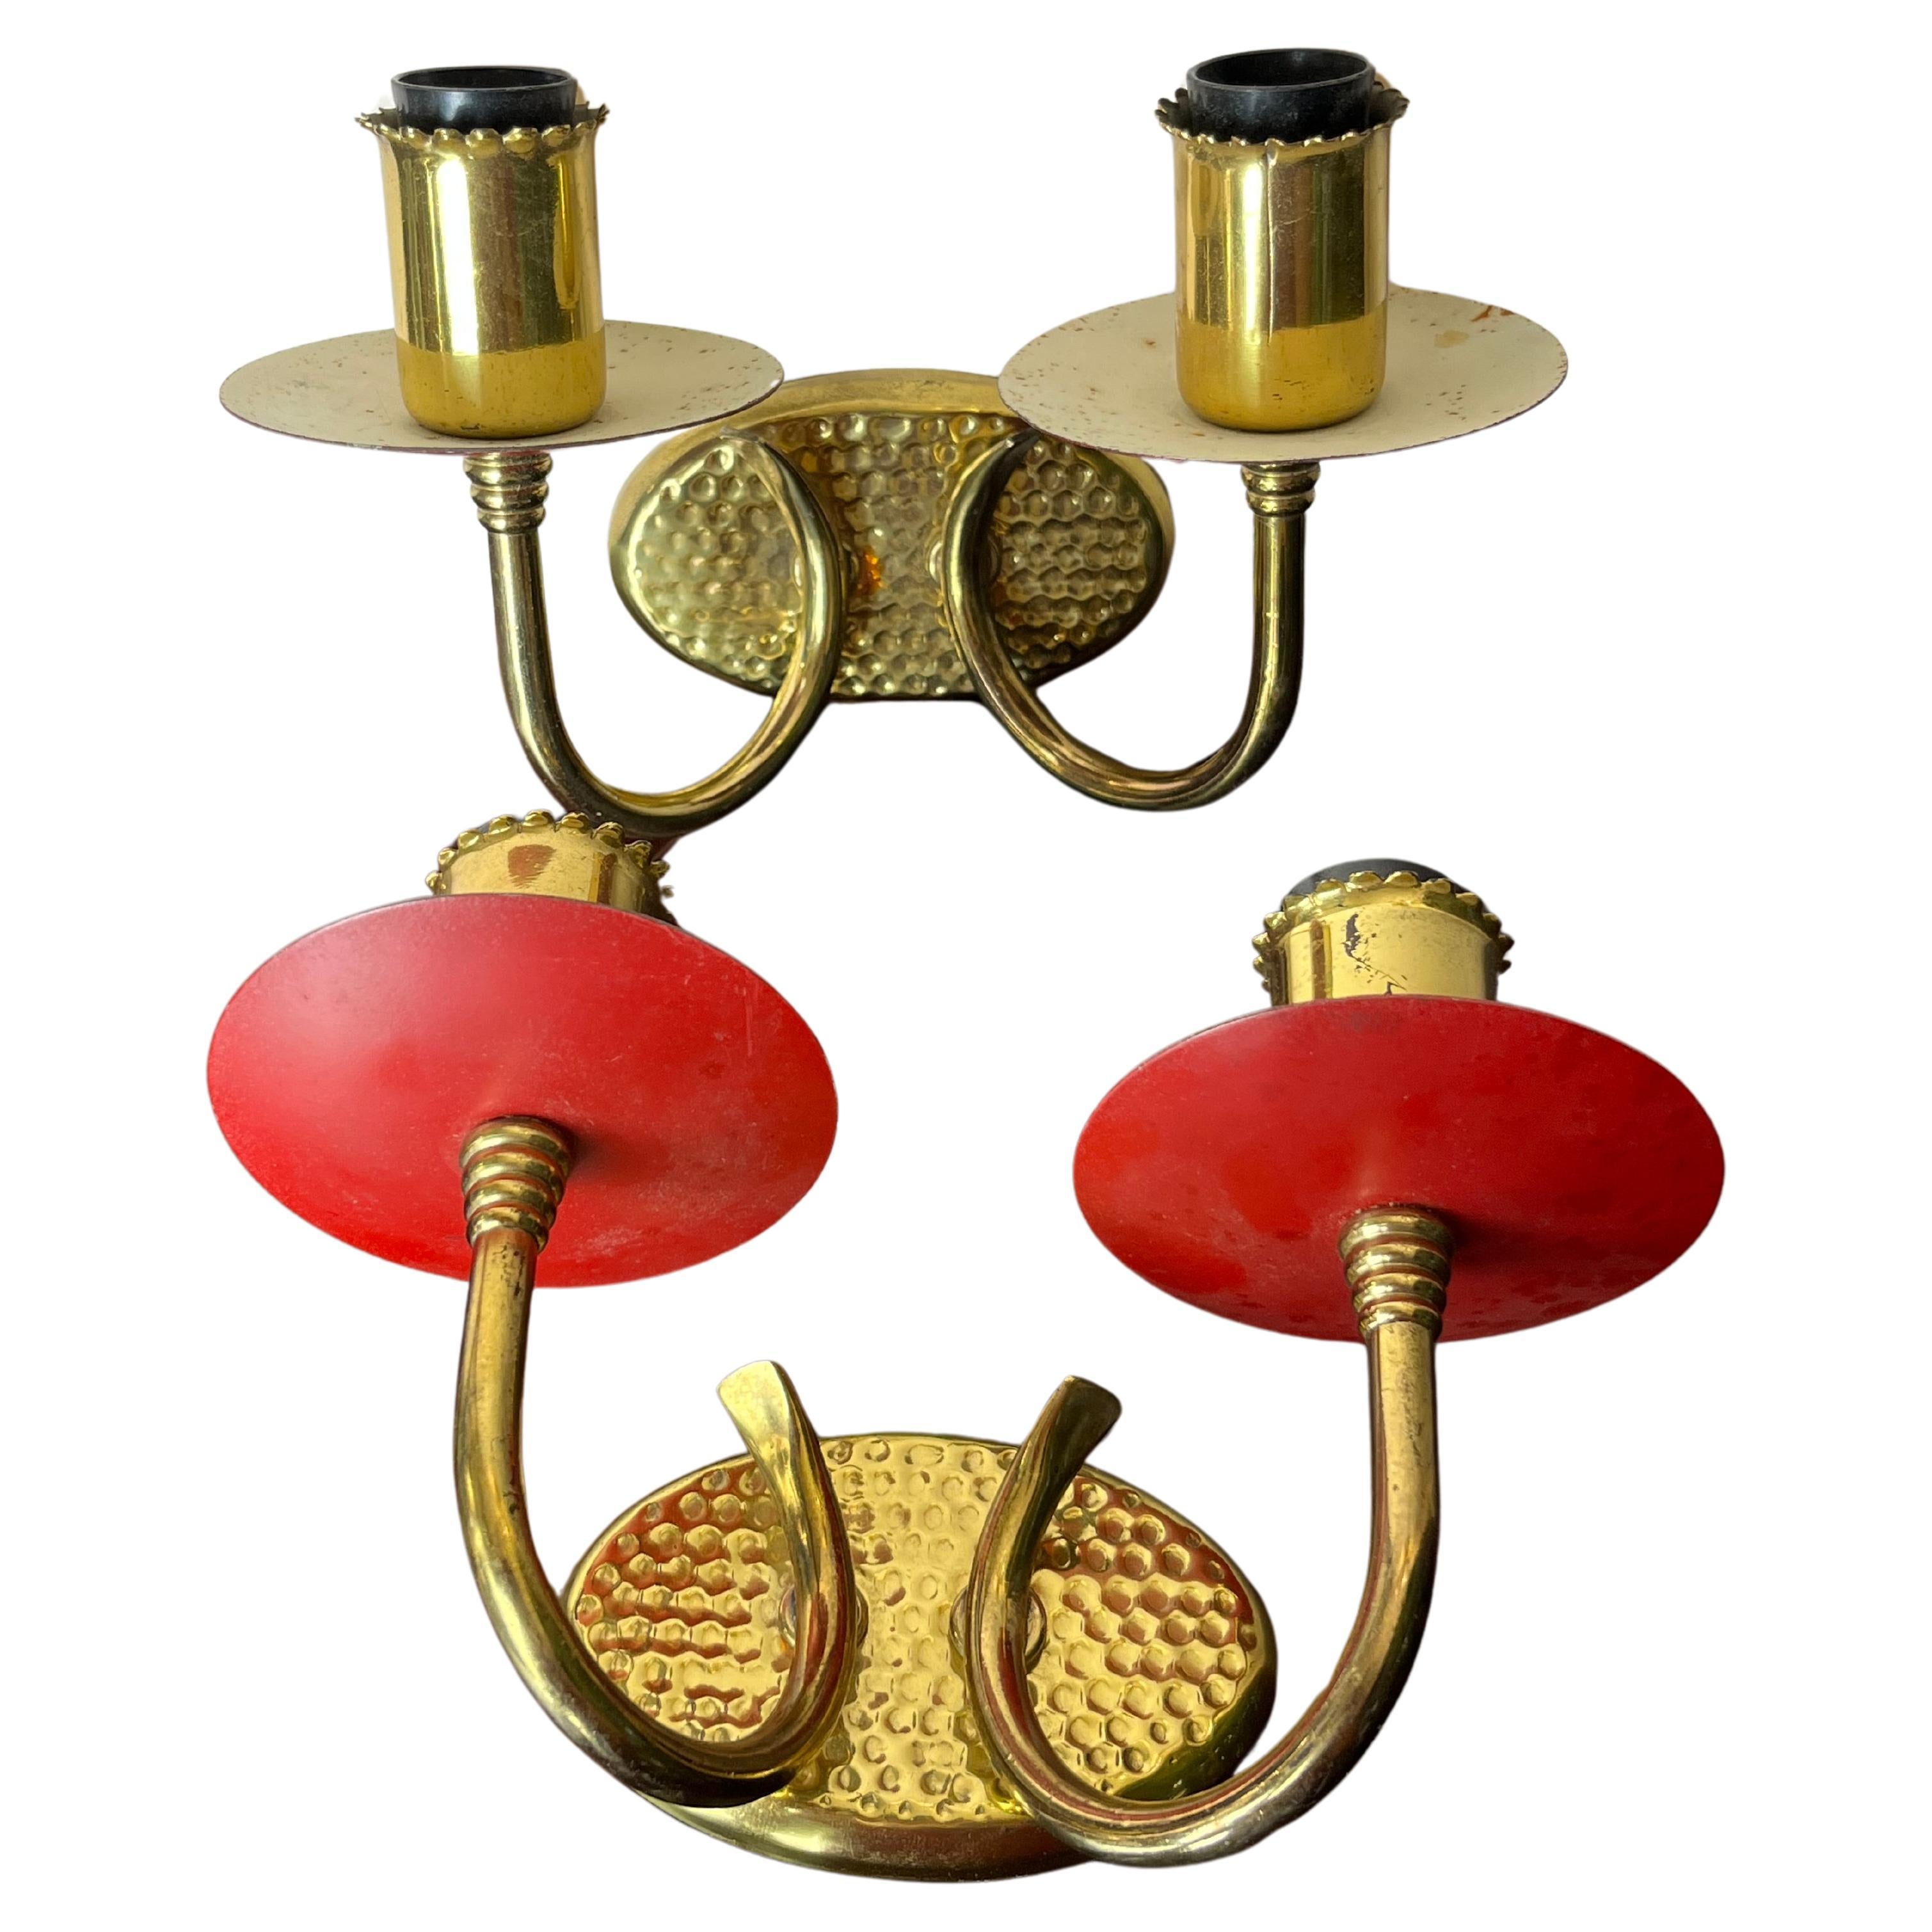 Set of 2 Wall Lamps in Brass and Colored Aluminium, Made in Italy, 1950s